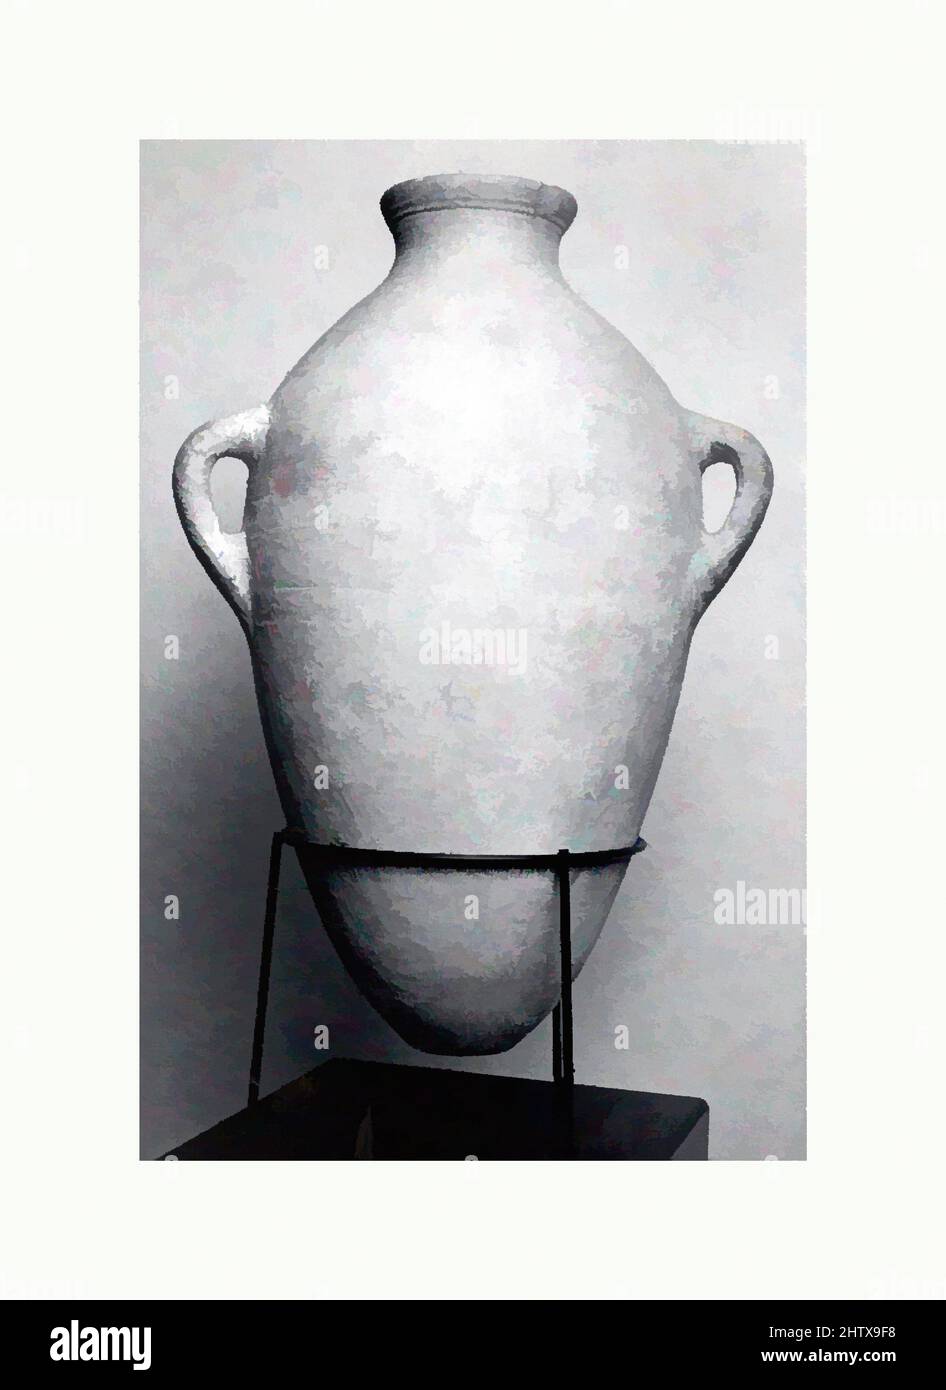 Art inspired by Canaanite jar, Late Bronze Age, ca. 1500–1400 B.C., Levant, Canaanite, Ceramic, H. 22.5 in. (57.1 cm), W. 15.5 in. (39.4 cm.), Ceramics-Vessels, Classic works modernized by Artotop with a splash of modernity. Shapes, color and value, eye-catching visual impact on art. Emotions through freedom of artworks in a contemporary way. A timeless message pursuing a wildly creative new direction. Artists turning to the digital medium and creating the Artotop NFT Stock Photo